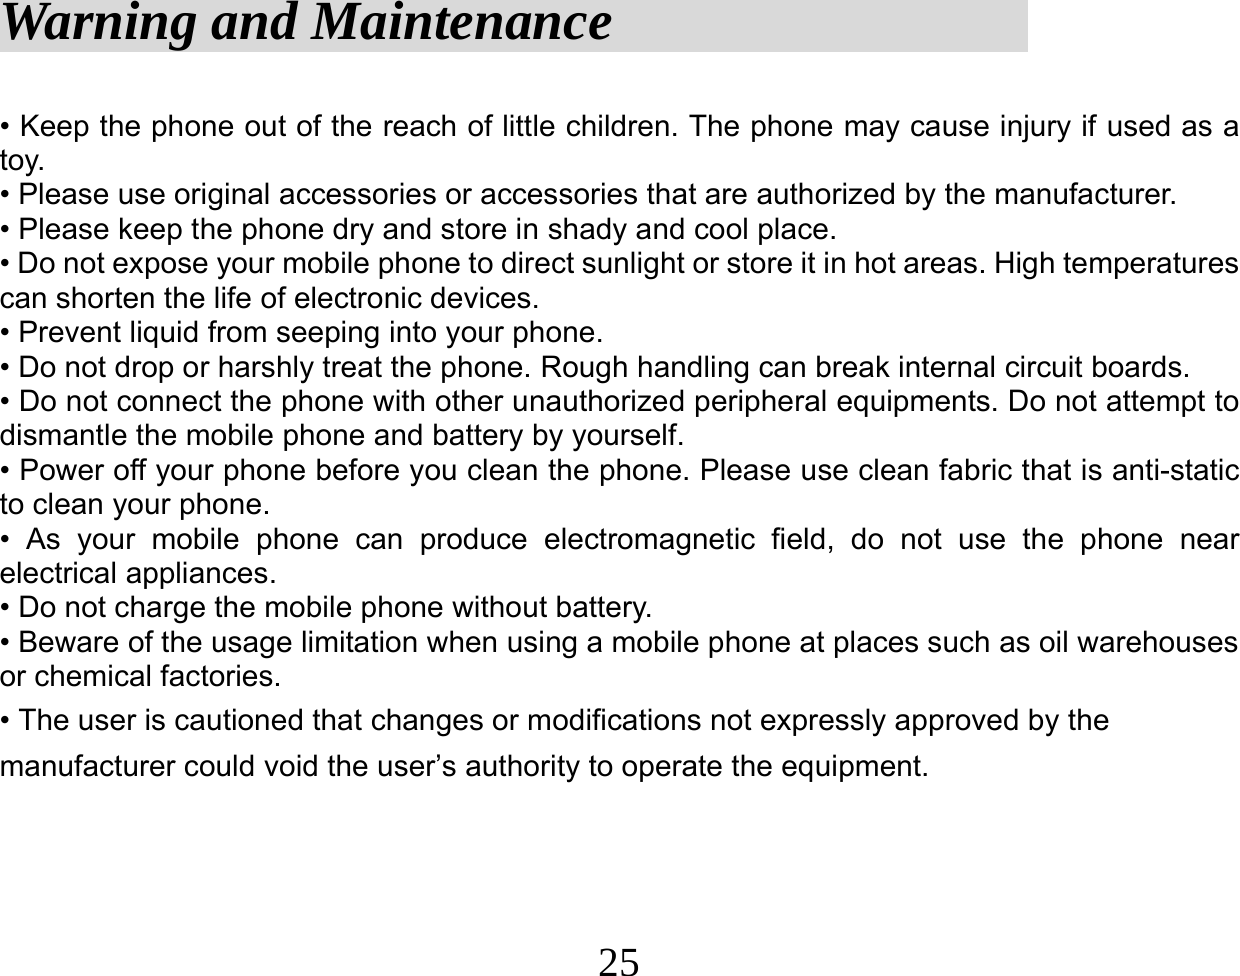  25Warning and Maintenance                   • Keep the phone out of the reach of little children. The phone may cause injury if used as a toy. • Please use original accessories or accessories that are authorized by the manufacturer. • Please keep the phone dry and store in shady and cool place. • Do not expose your mobile phone to direct sunlight or store it in hot areas. High temperatures can shorten the life of electronic devices. • Prevent liquid from seeping into your phone. • Do not drop or harshly treat the phone. Rough handling can break internal circuit boards. • Do not connect the phone with other unauthorized peripheral equipments. Do not attempt to dismantle the mobile phone and battery by yourself. • Power off your phone before you clean the phone. Please use clean fabric that is anti-static to clean your phone. • As your mobile phone can produce electromagnetic field, do not use the phone near electrical appliances. • Do not charge the mobile phone without battery. • Beware of the usage limitation when using a mobile phone at places such as oil warehouses or chemical factories. • The user is cautioned that changes or modifications not expressly approved by the manufacturer could void the user’s authority to operate the equipment. 